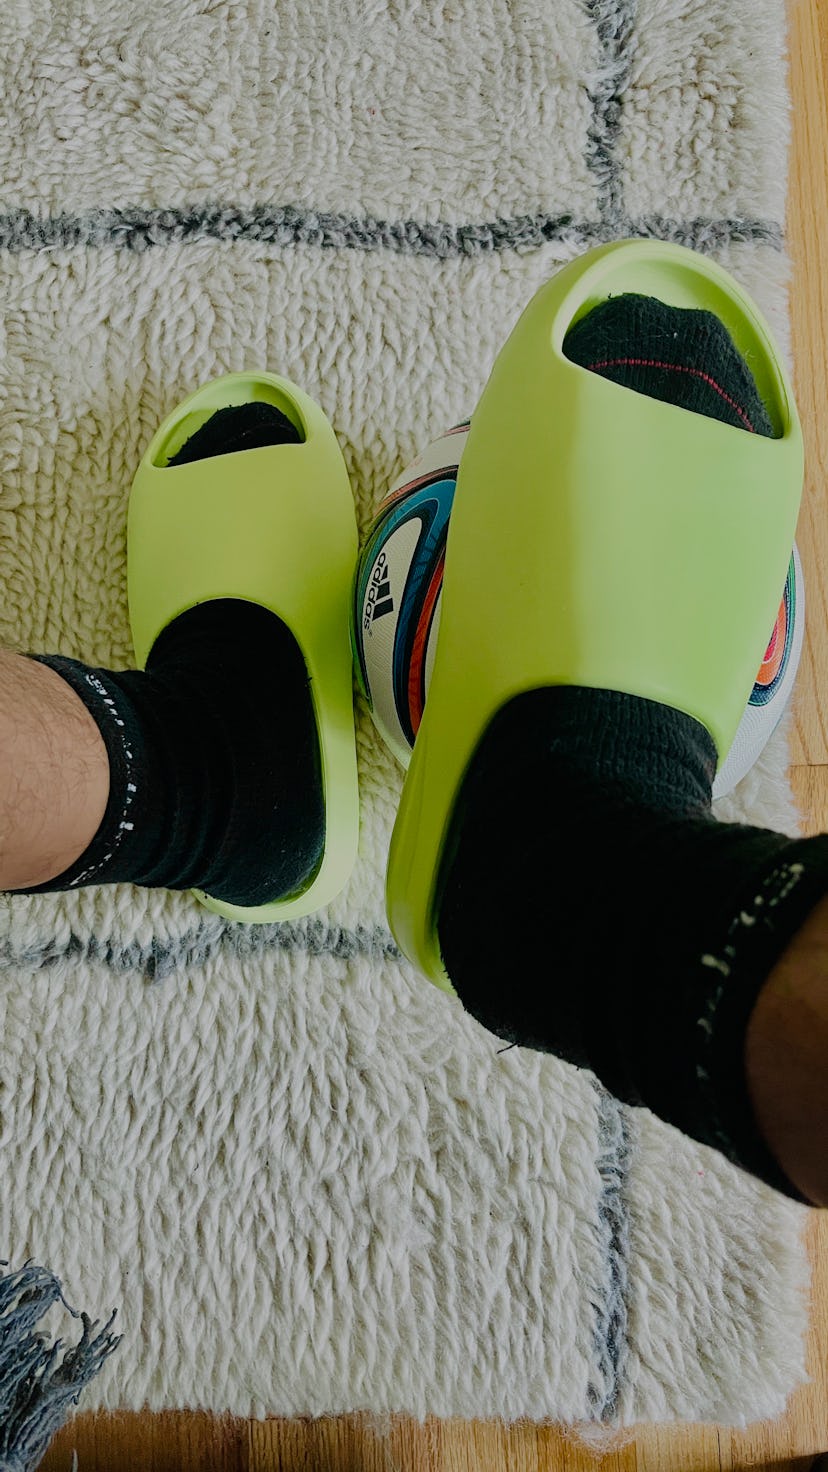 Adidas Yeezy Slides Glow Green Kanye West review on feet